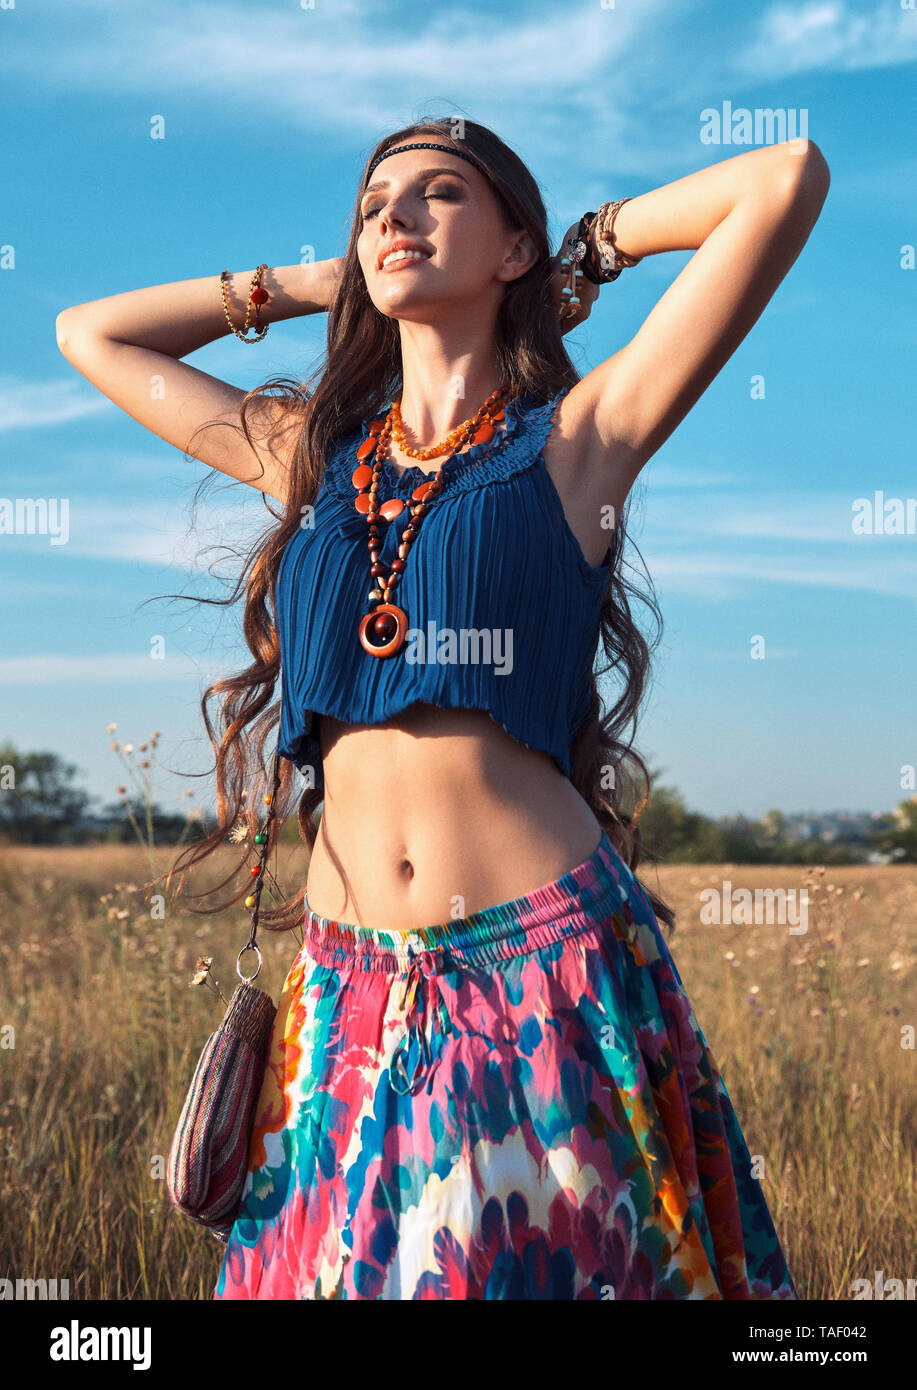 Outdoor portrait of the smiling cute young boho (hippie) girl in field. Film grain added Stock Photo